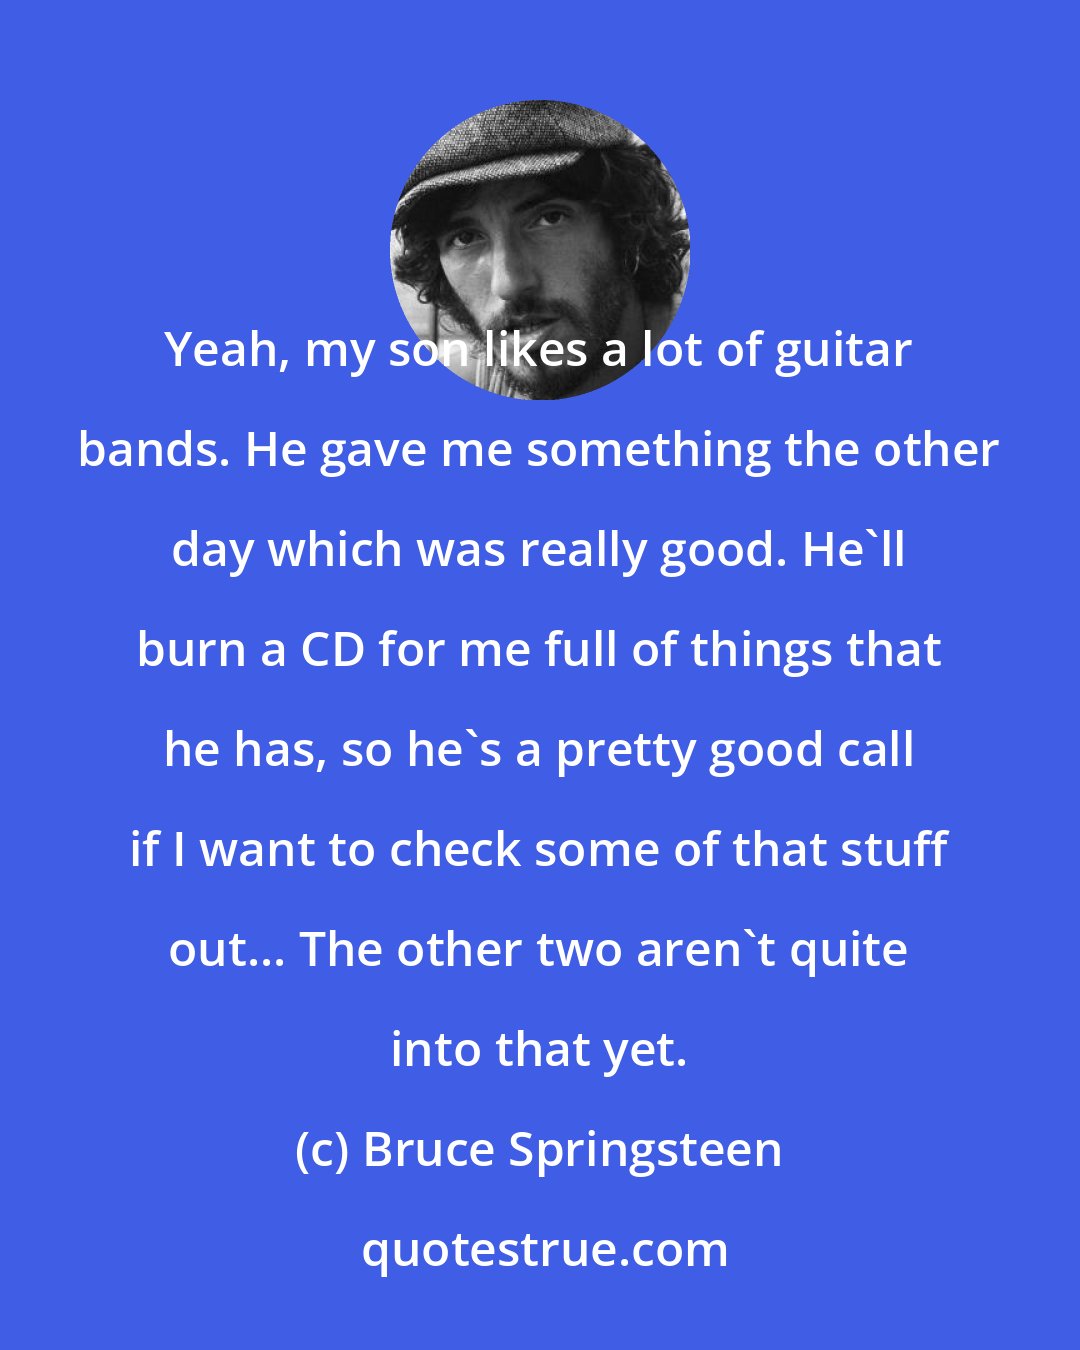 Bruce Springsteen: Yeah, my son likes a lot of guitar bands. He gave me something the other day which was really good. He'll burn a CD for me full of things that he has, so he's a pretty good call if I want to check some of that stuff out... The other two aren't quite into that yet.